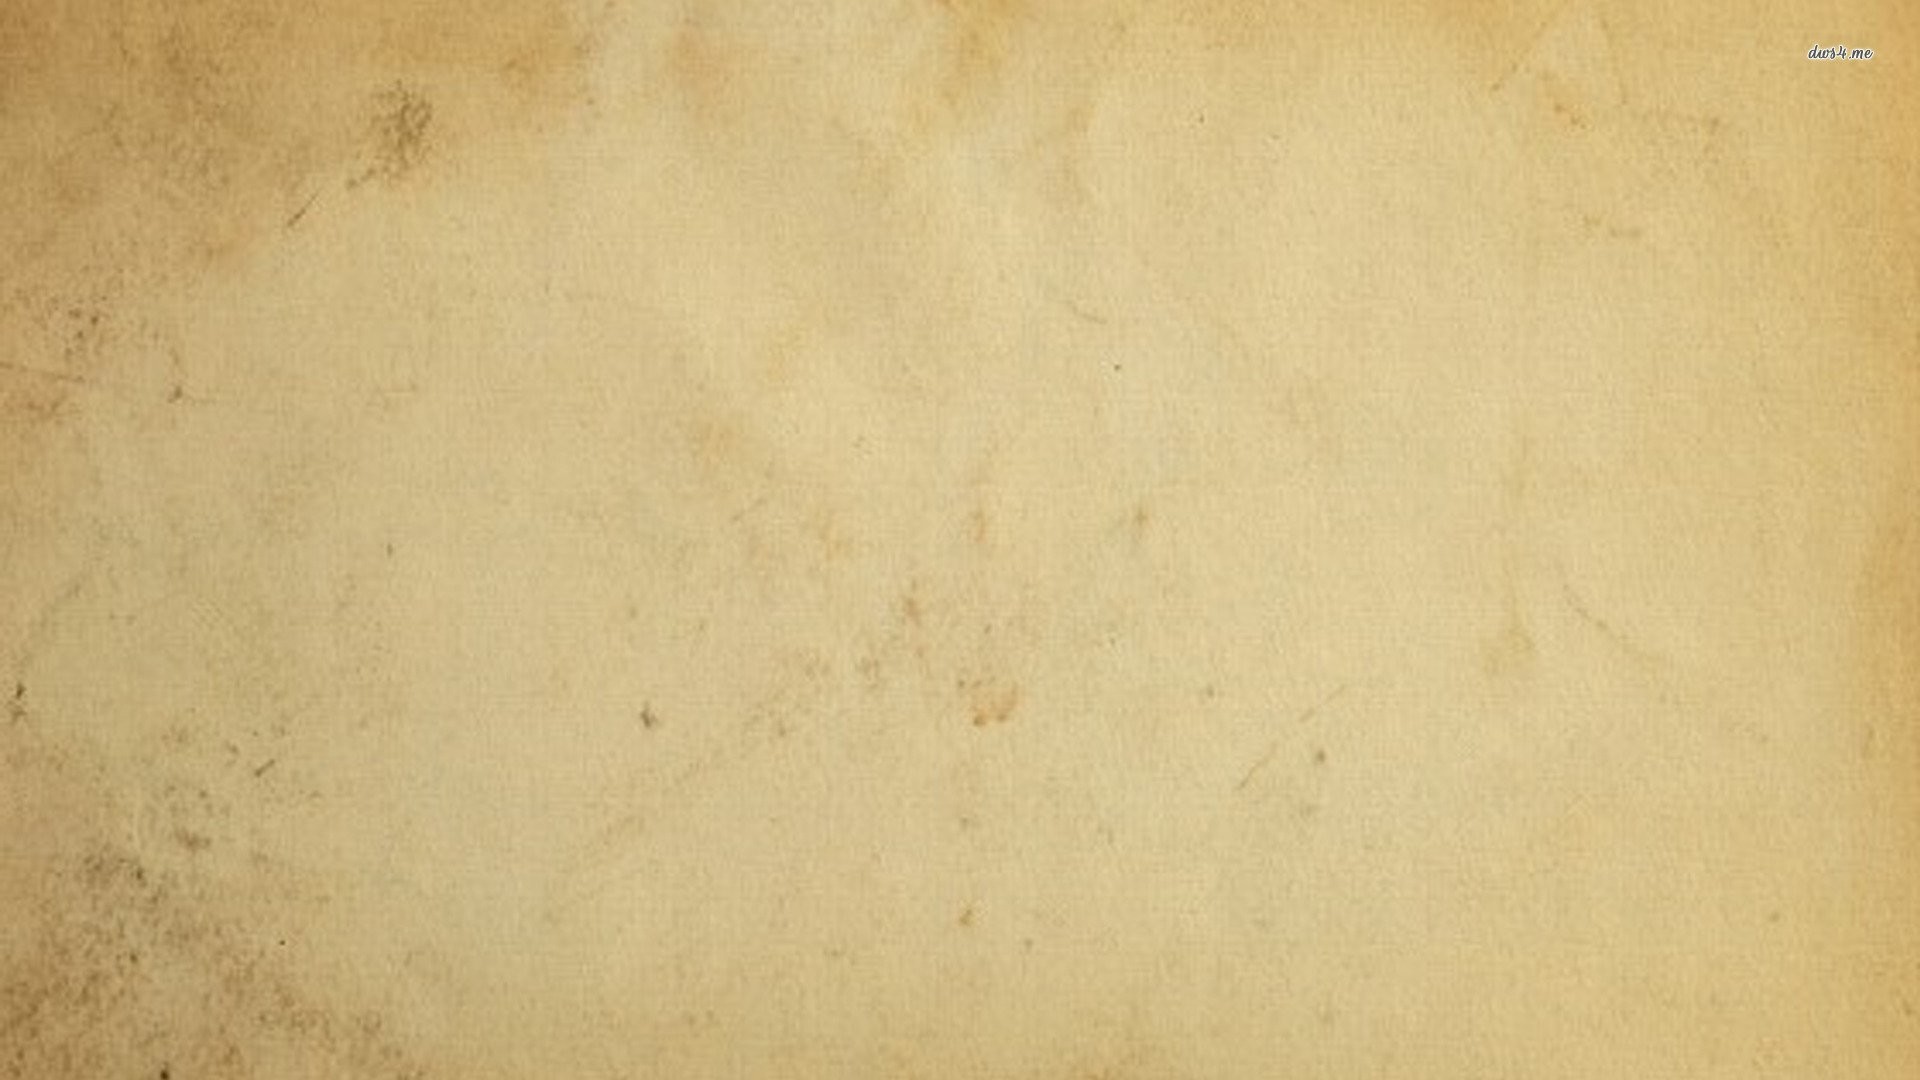 1920x1080 Old Paper Texture 320047